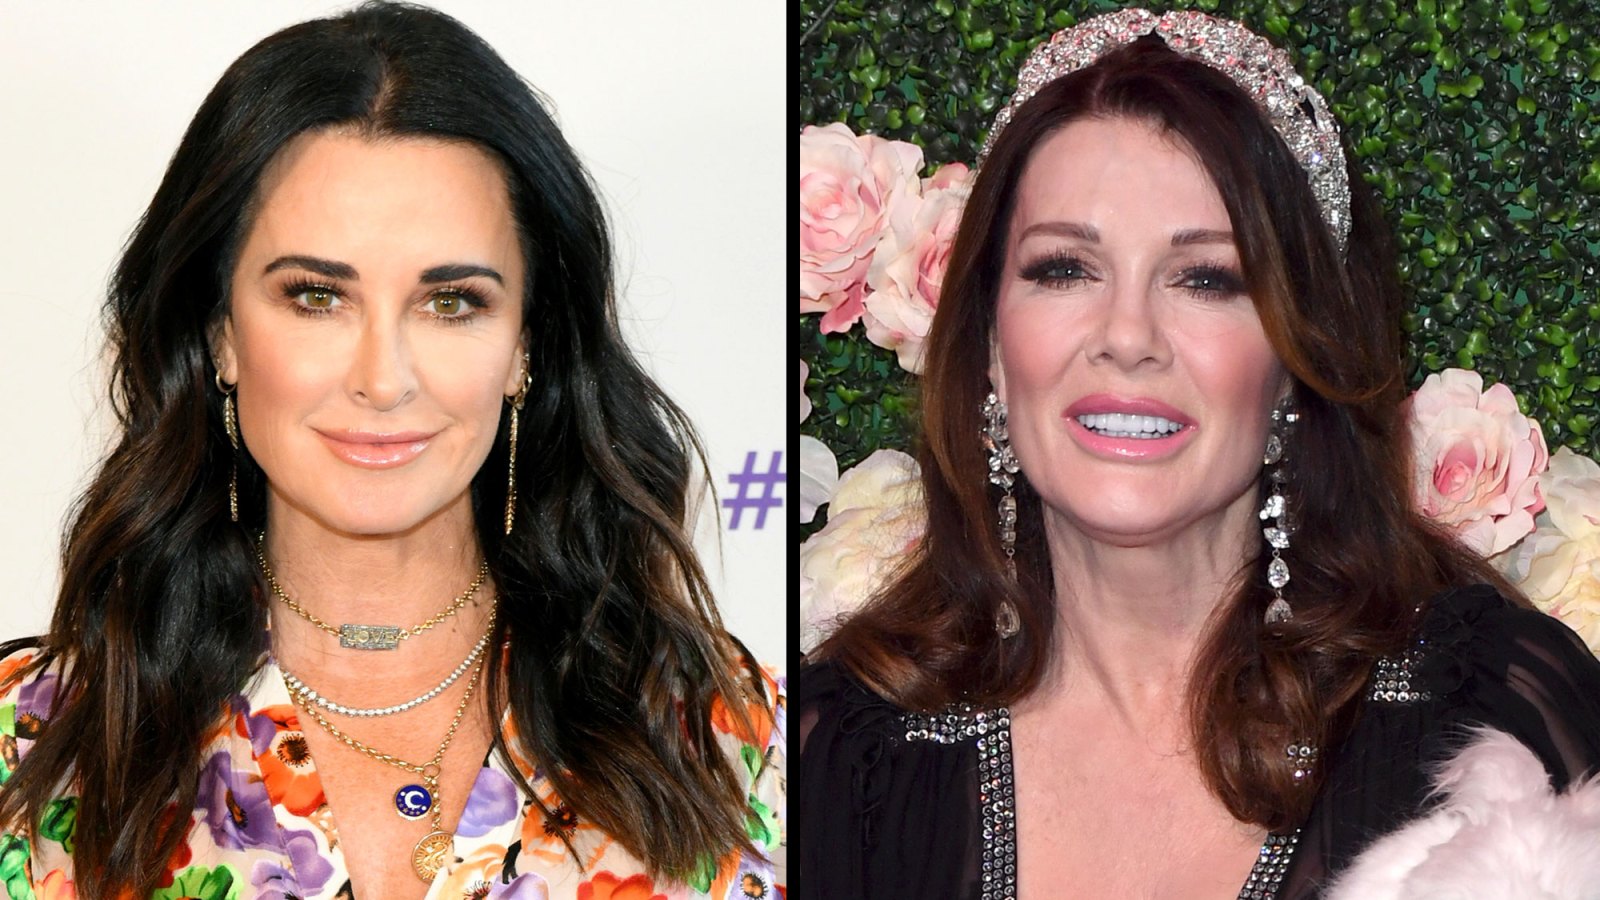 Kyle Richards Says Run-In With Lisa Vanderpump Was ‘Extremely Awkward’